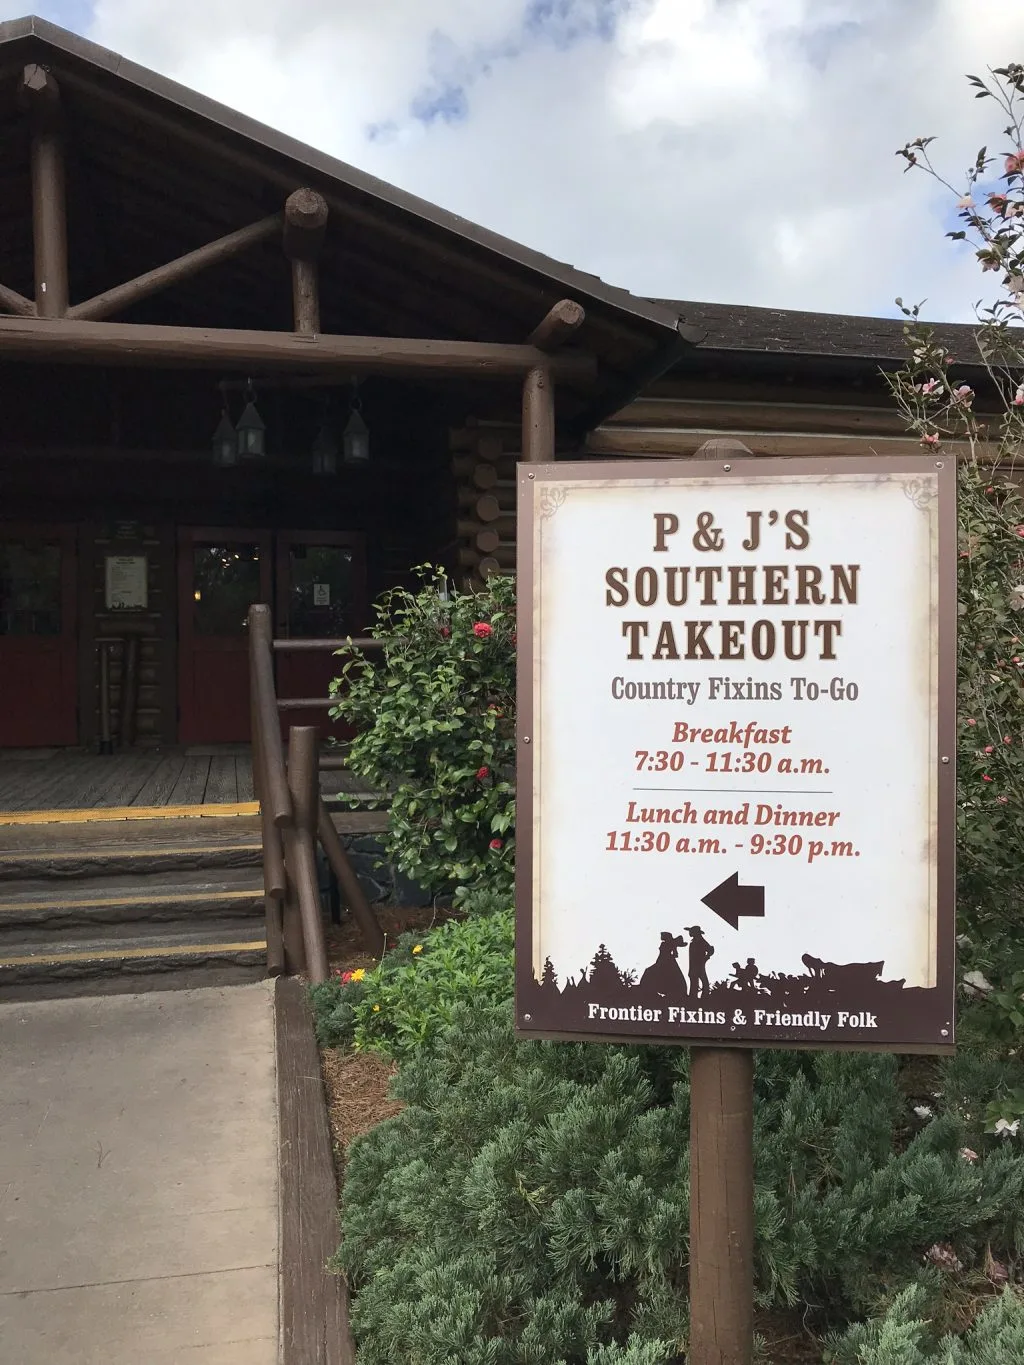 P & J's Southern Takeout Entrance Sign with eating times